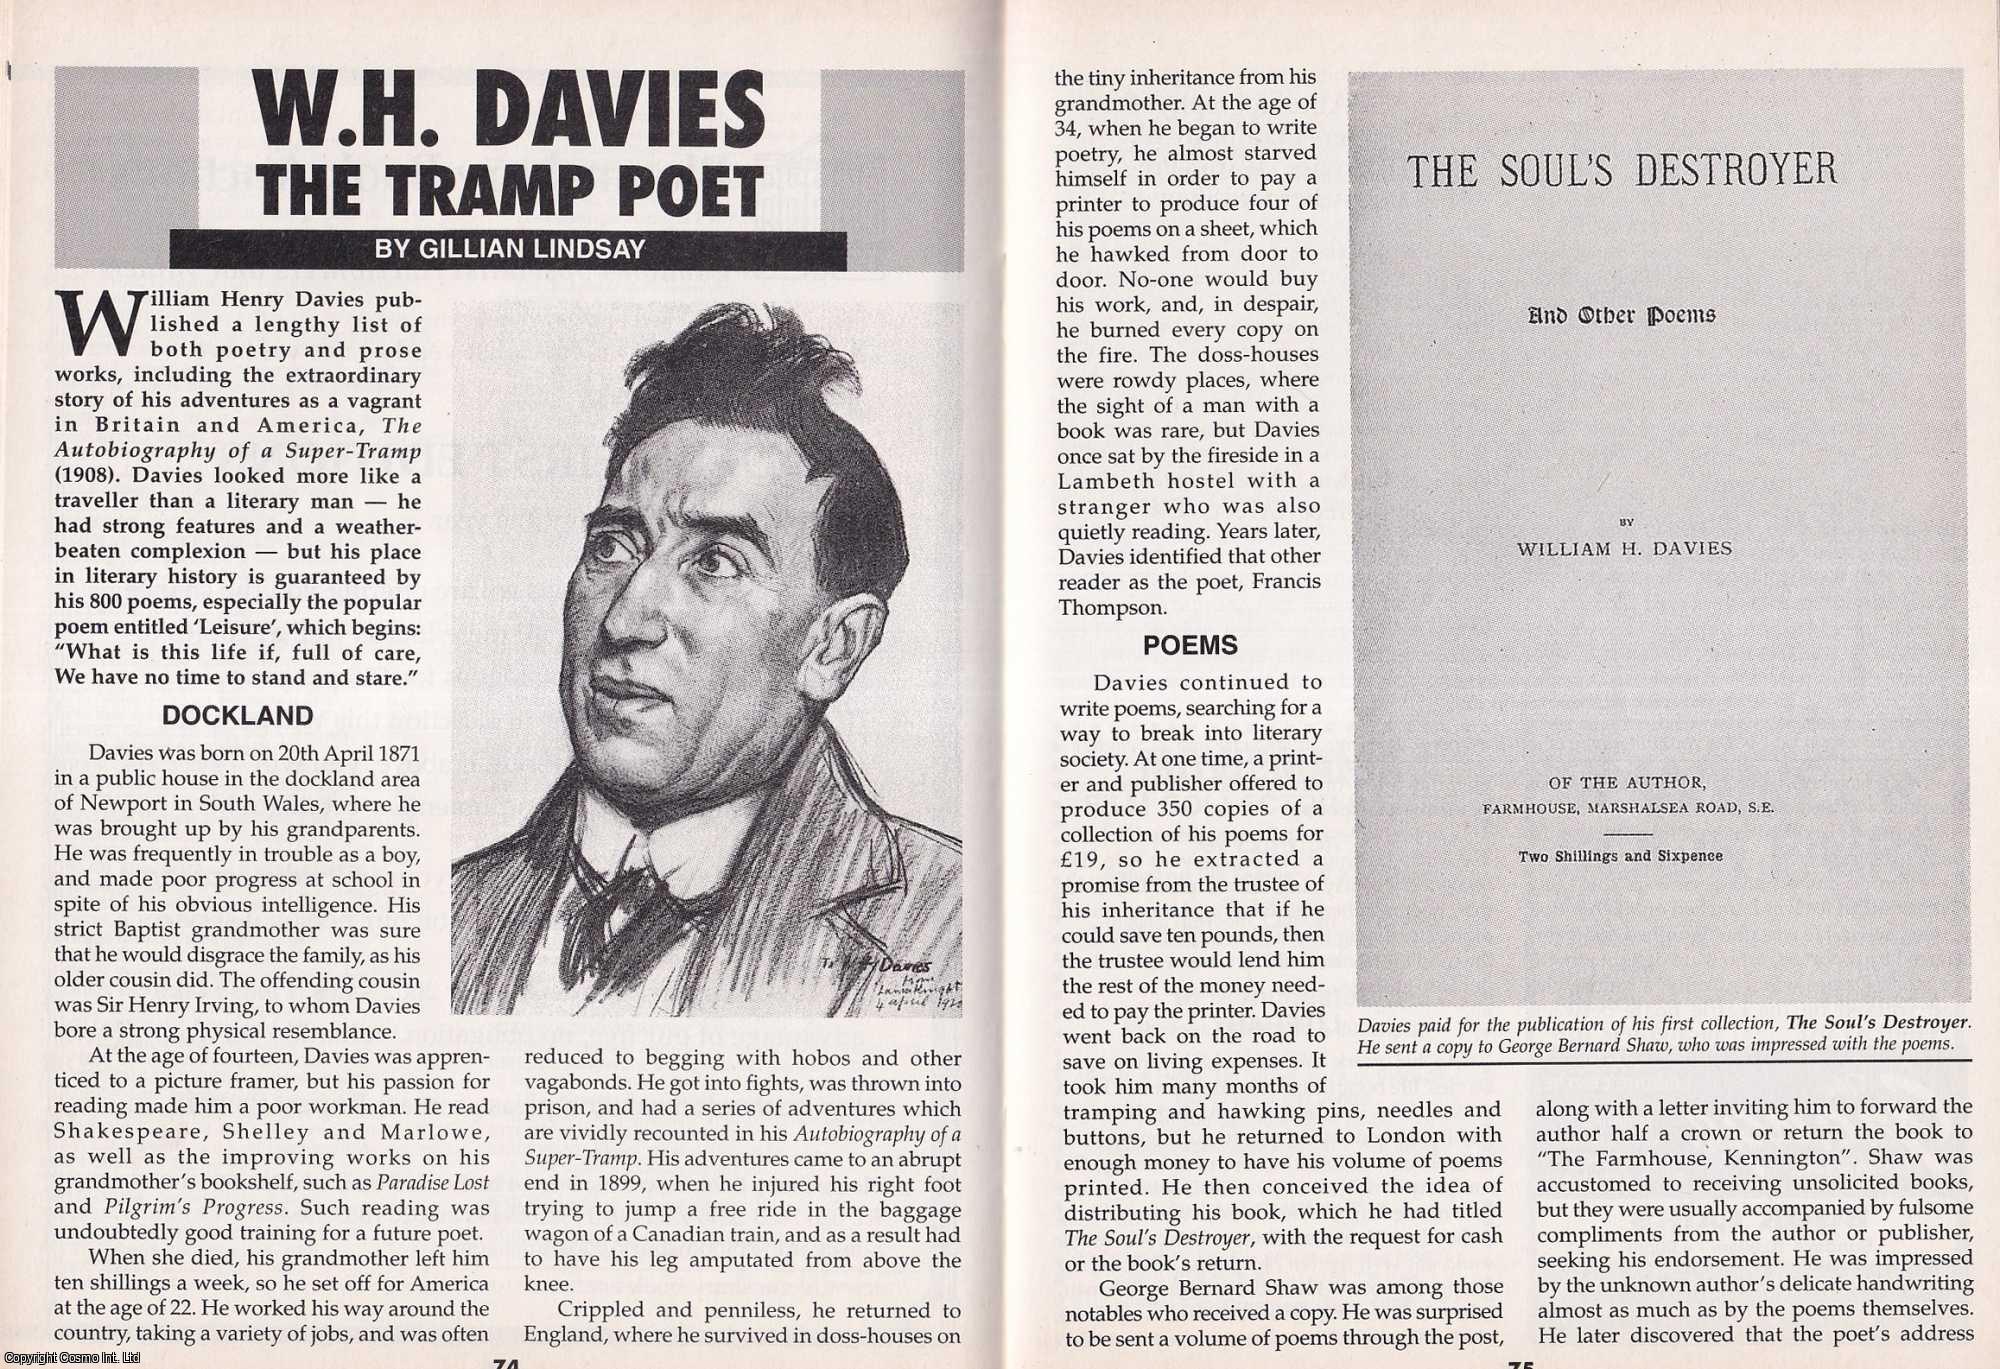 Gillian Lindsay - W.H. Davies. The Tramp Poet. This is an original article separated from an issue of The Book & Magazine Collector publication, 2002.